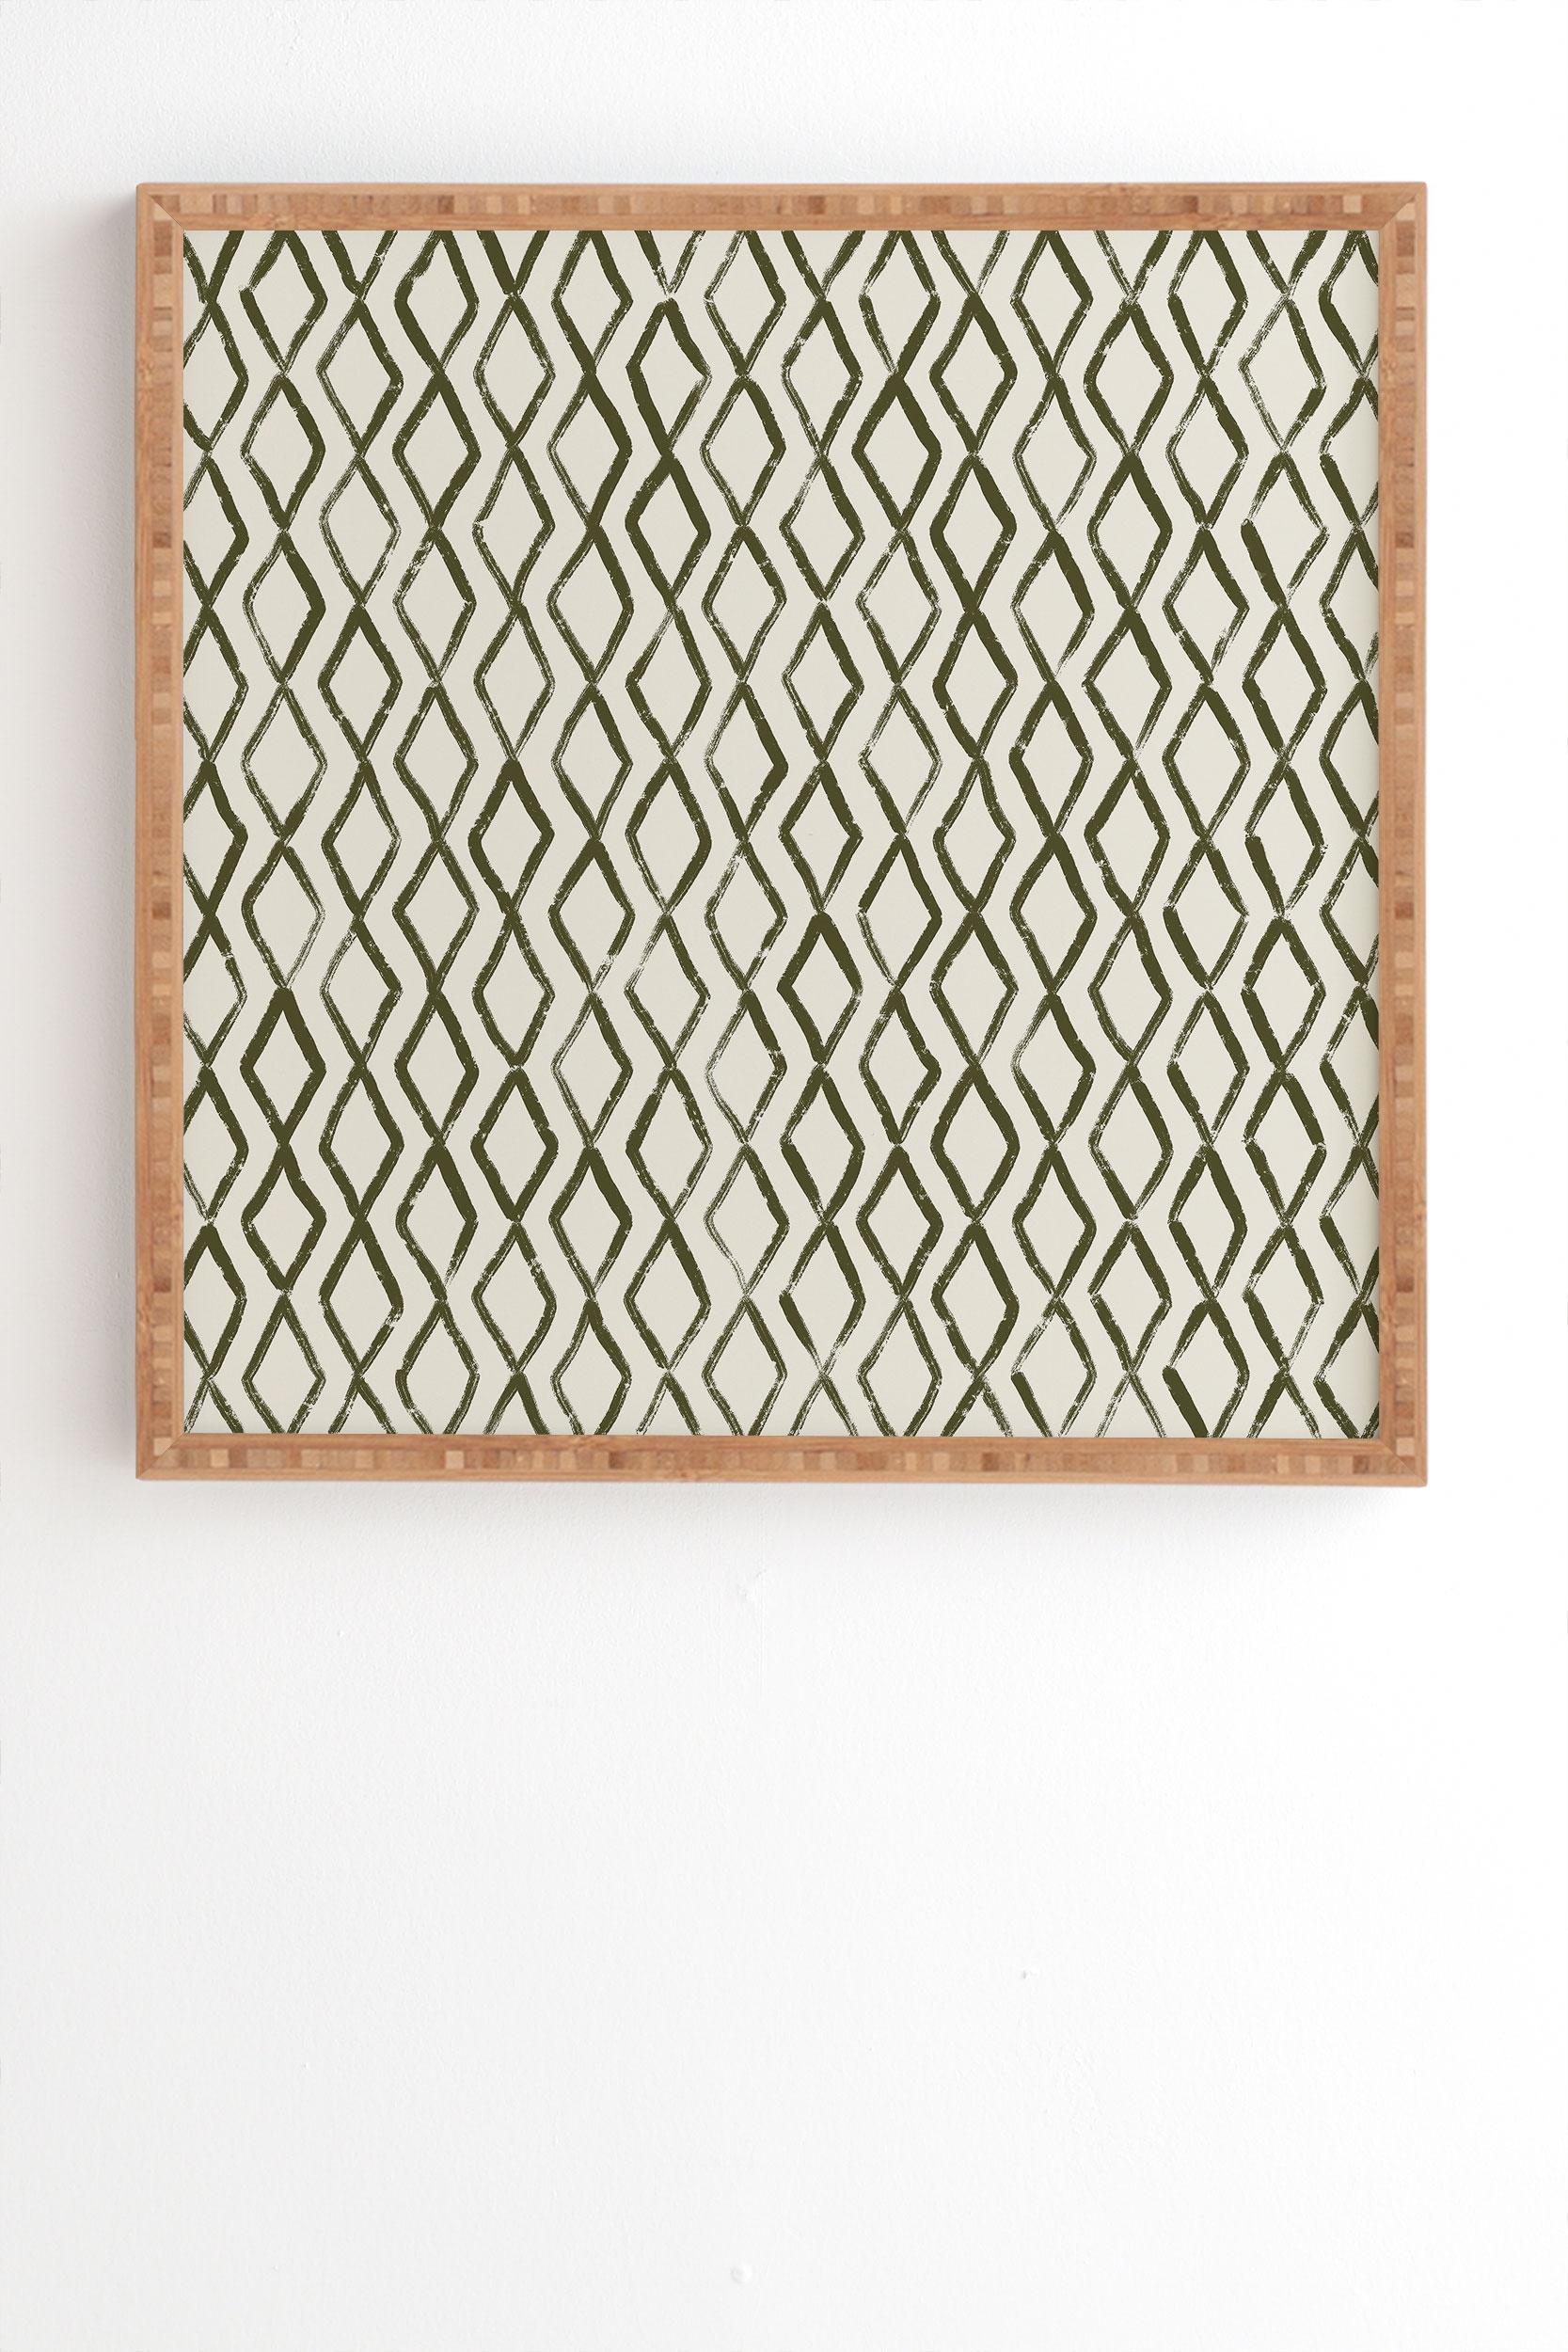 Simple Hand Drawn Pattern Vi by Alisa Galitsyna - Framed Wall Art Bamboo 12" x 12" - Image 0